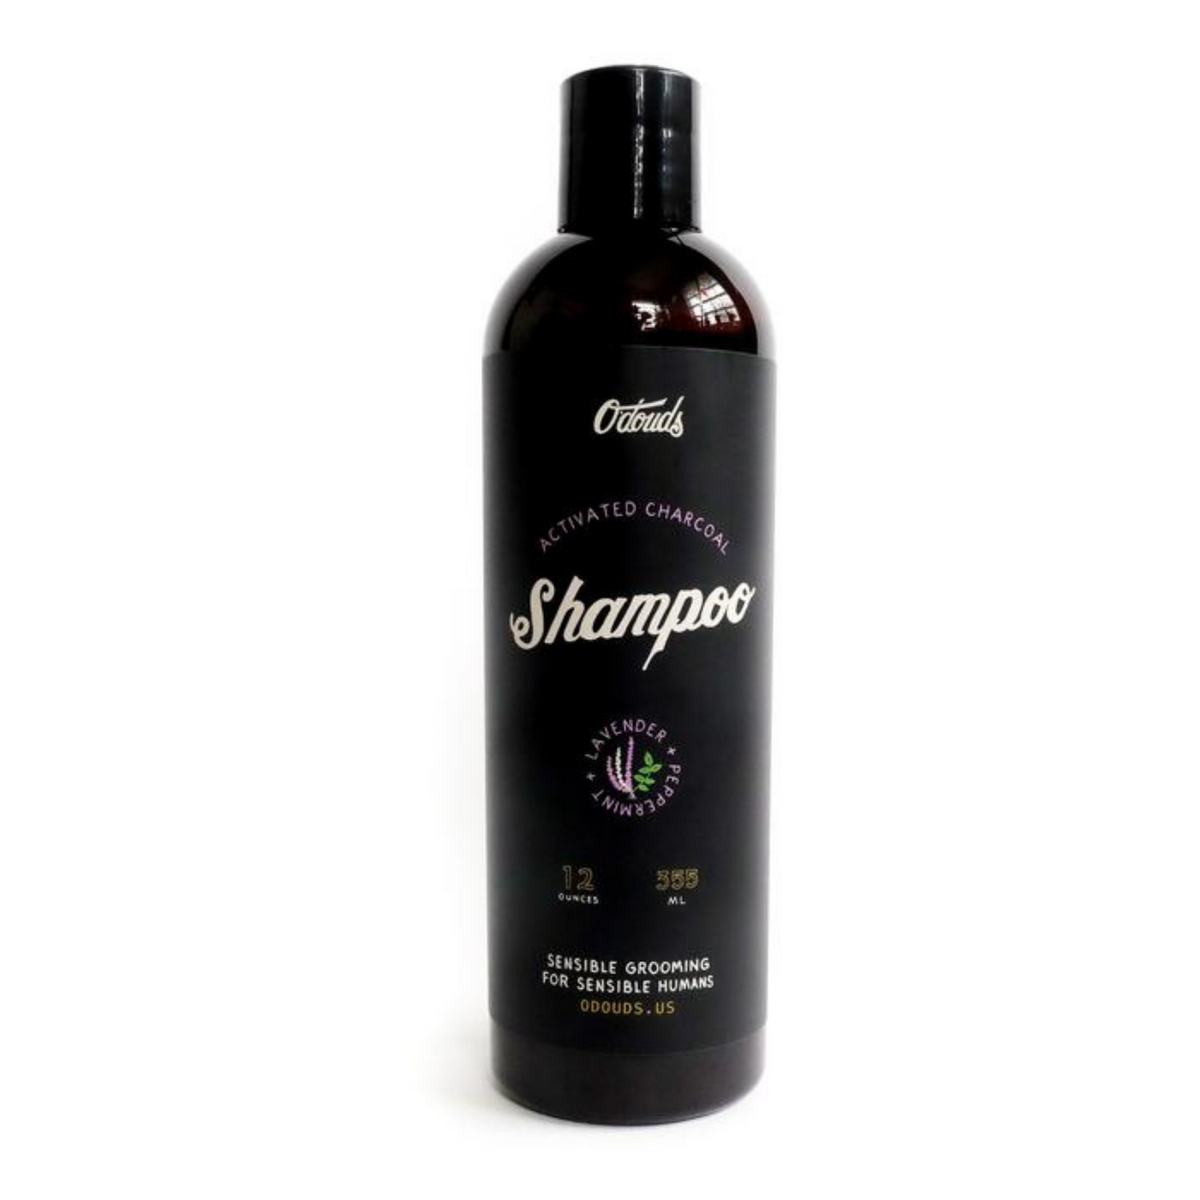 Primary Image of Activated Charcoal Shampoo